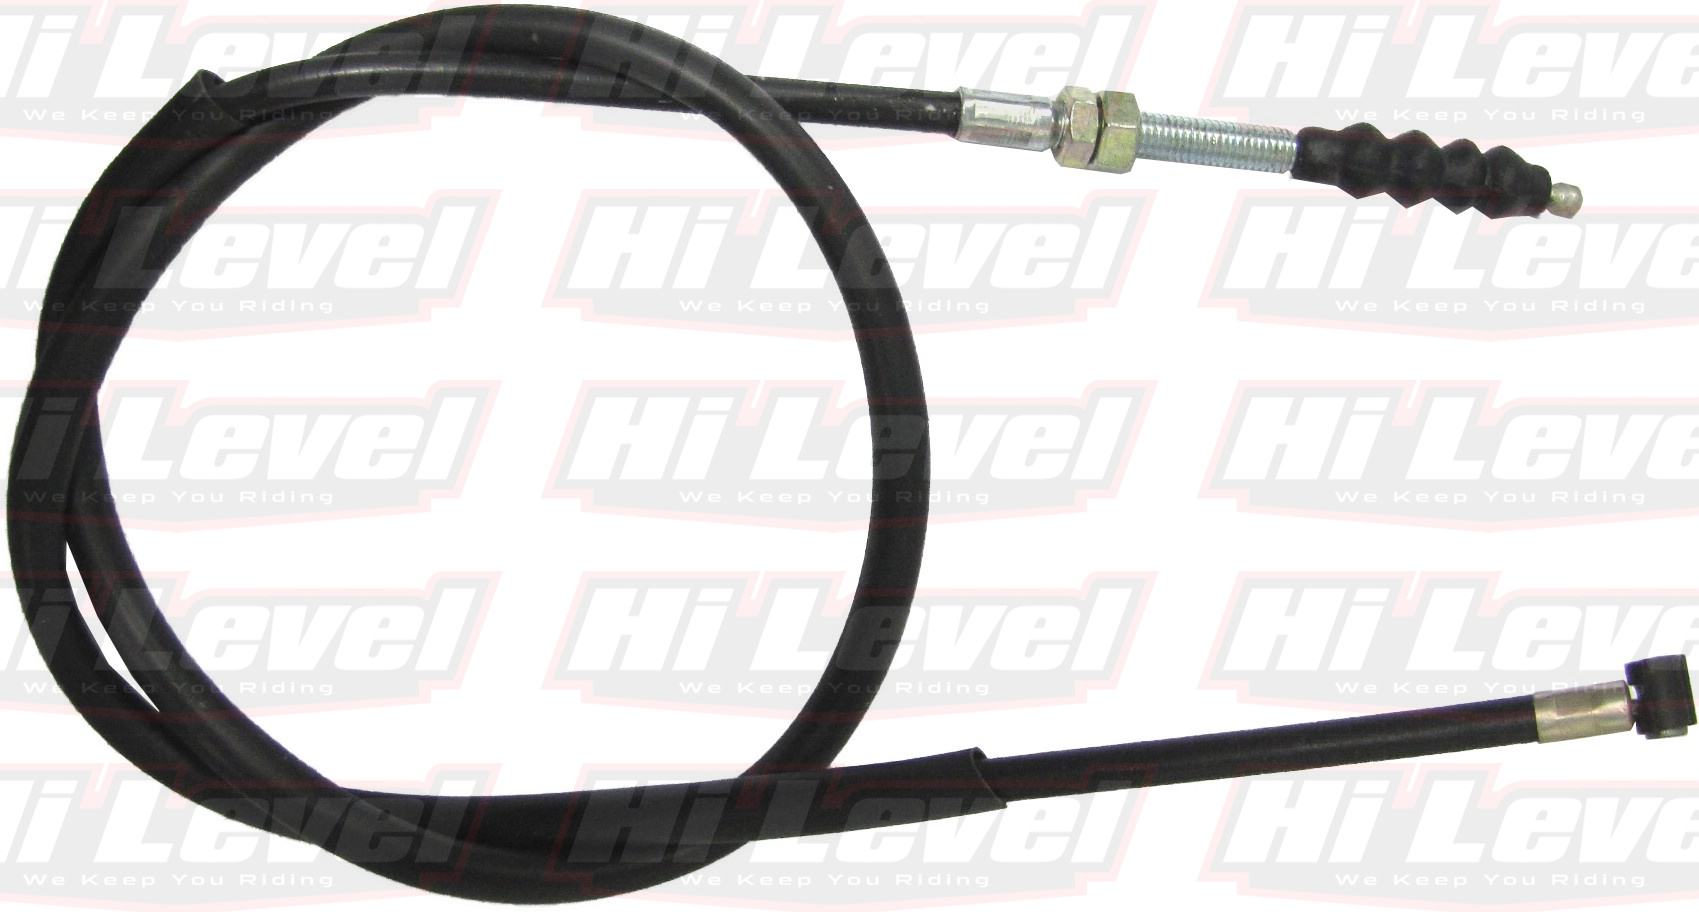 Honda Clutch Cable Honda CL125RS City Fly, XL125RS, CB125RS new